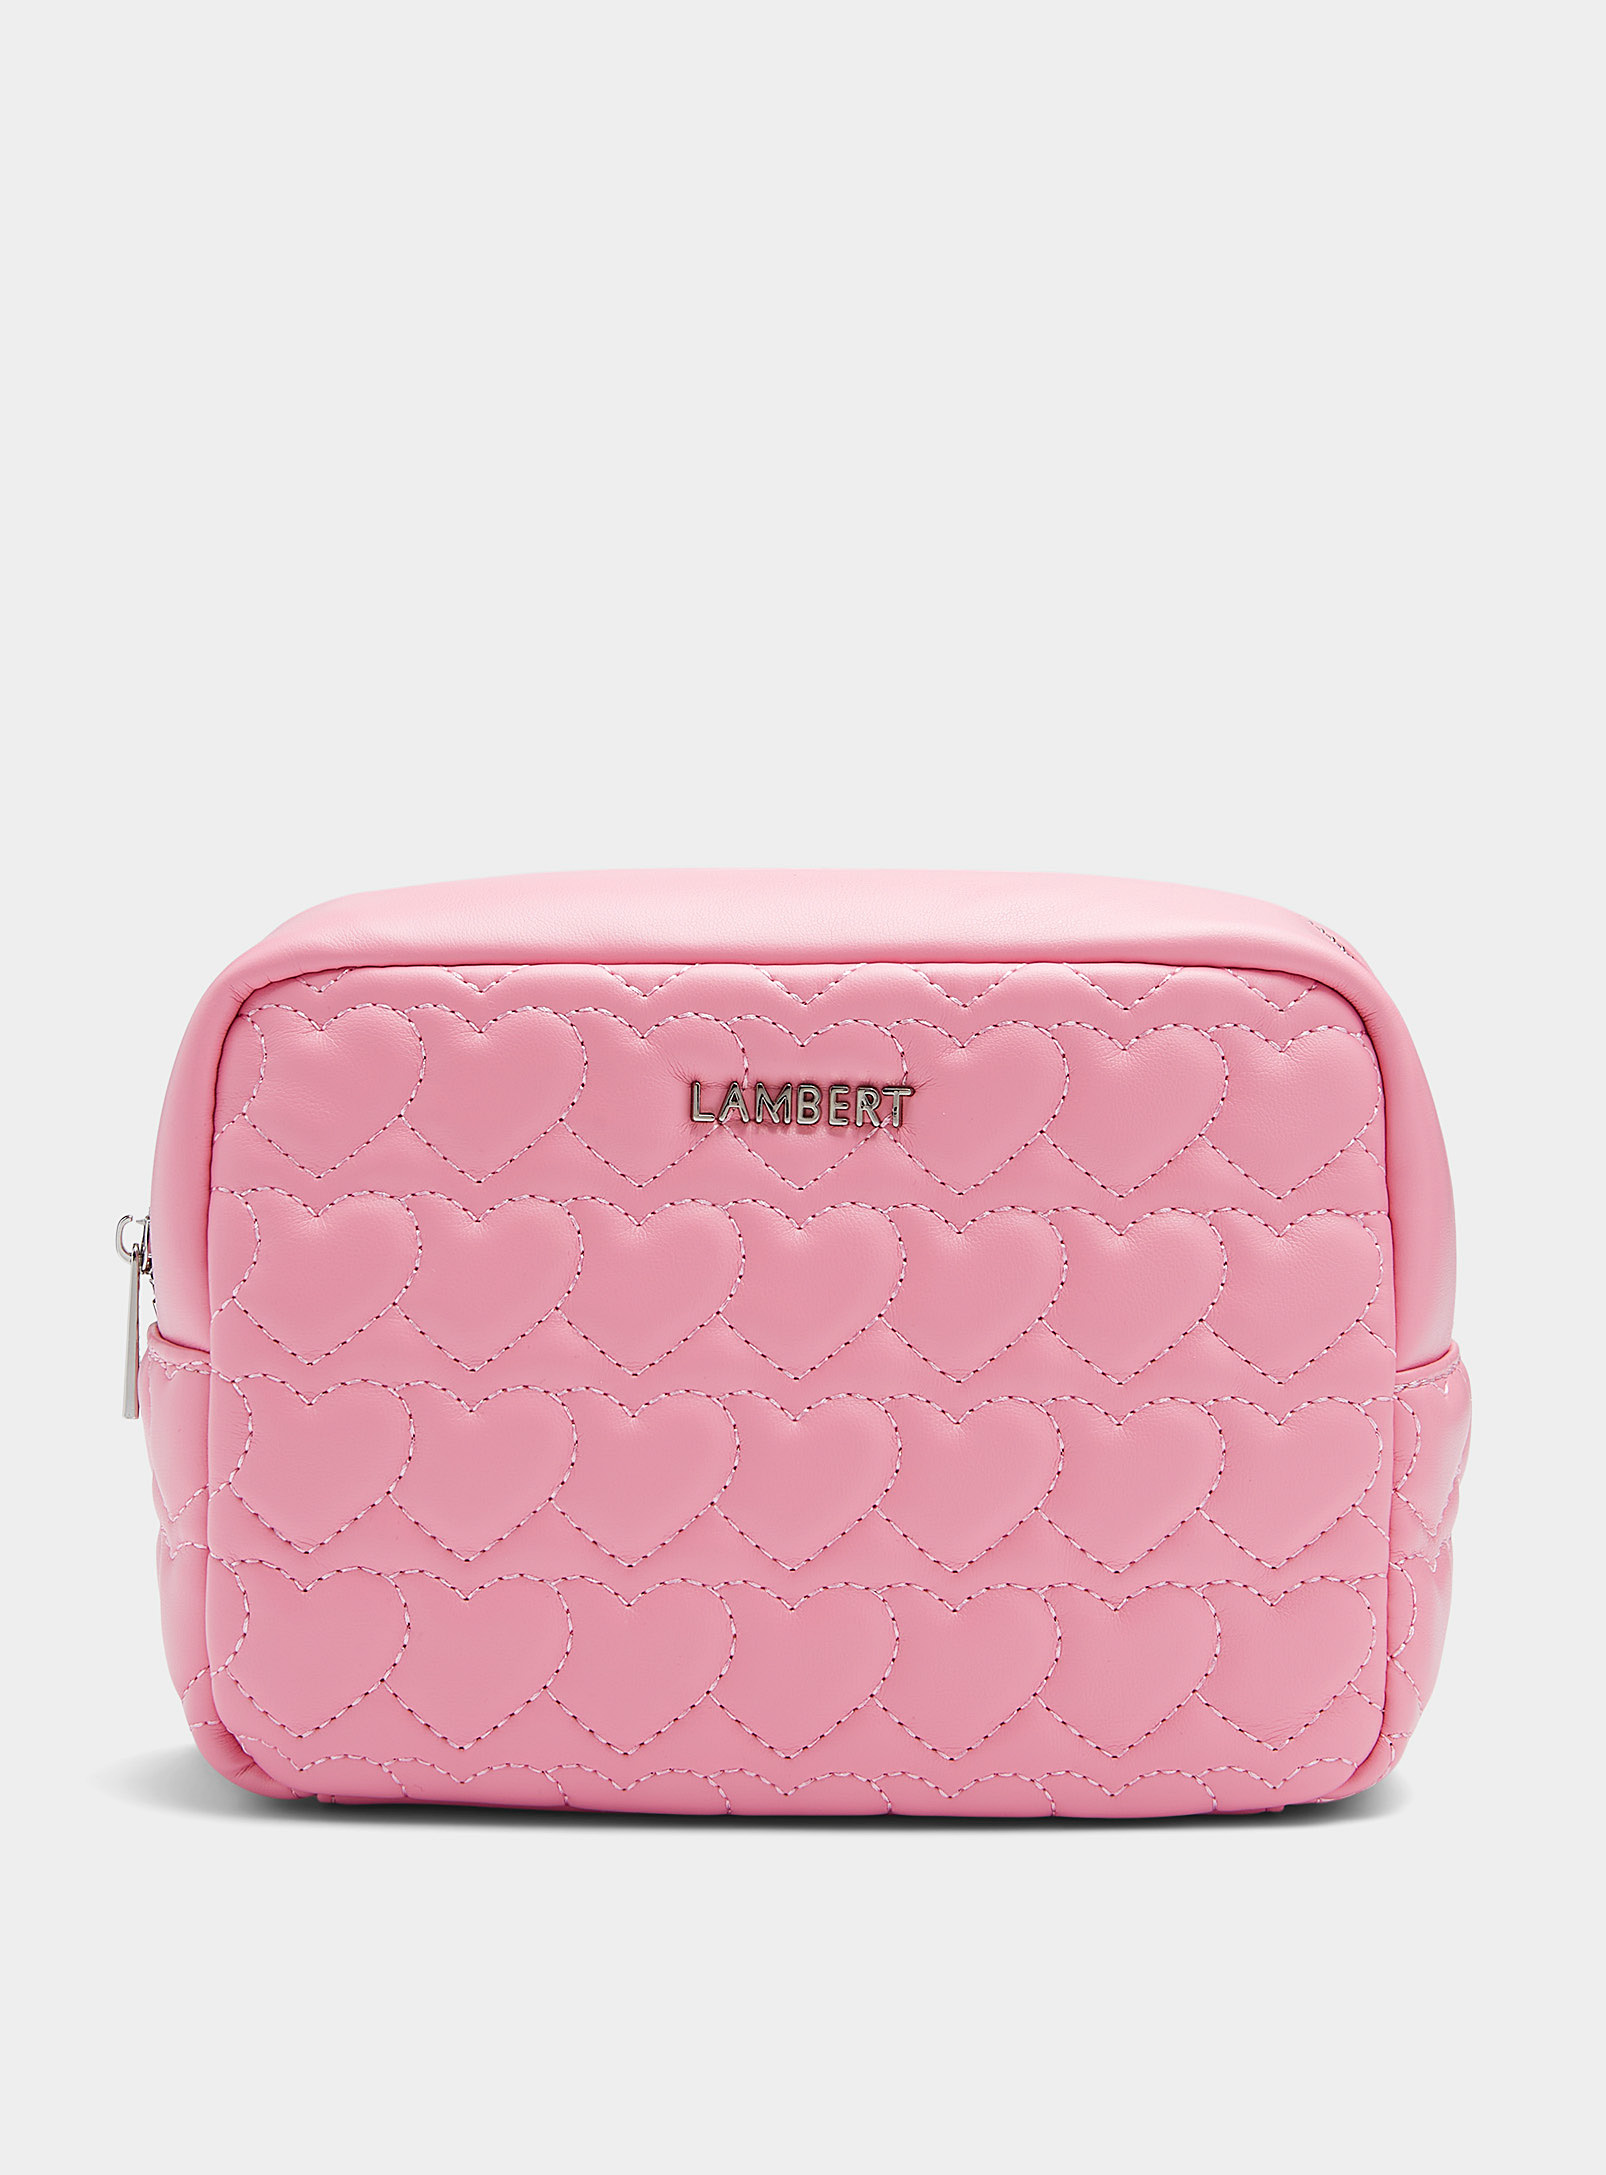 Lambert Rosie Topstitched Hearts Cosmetic Case In Pink